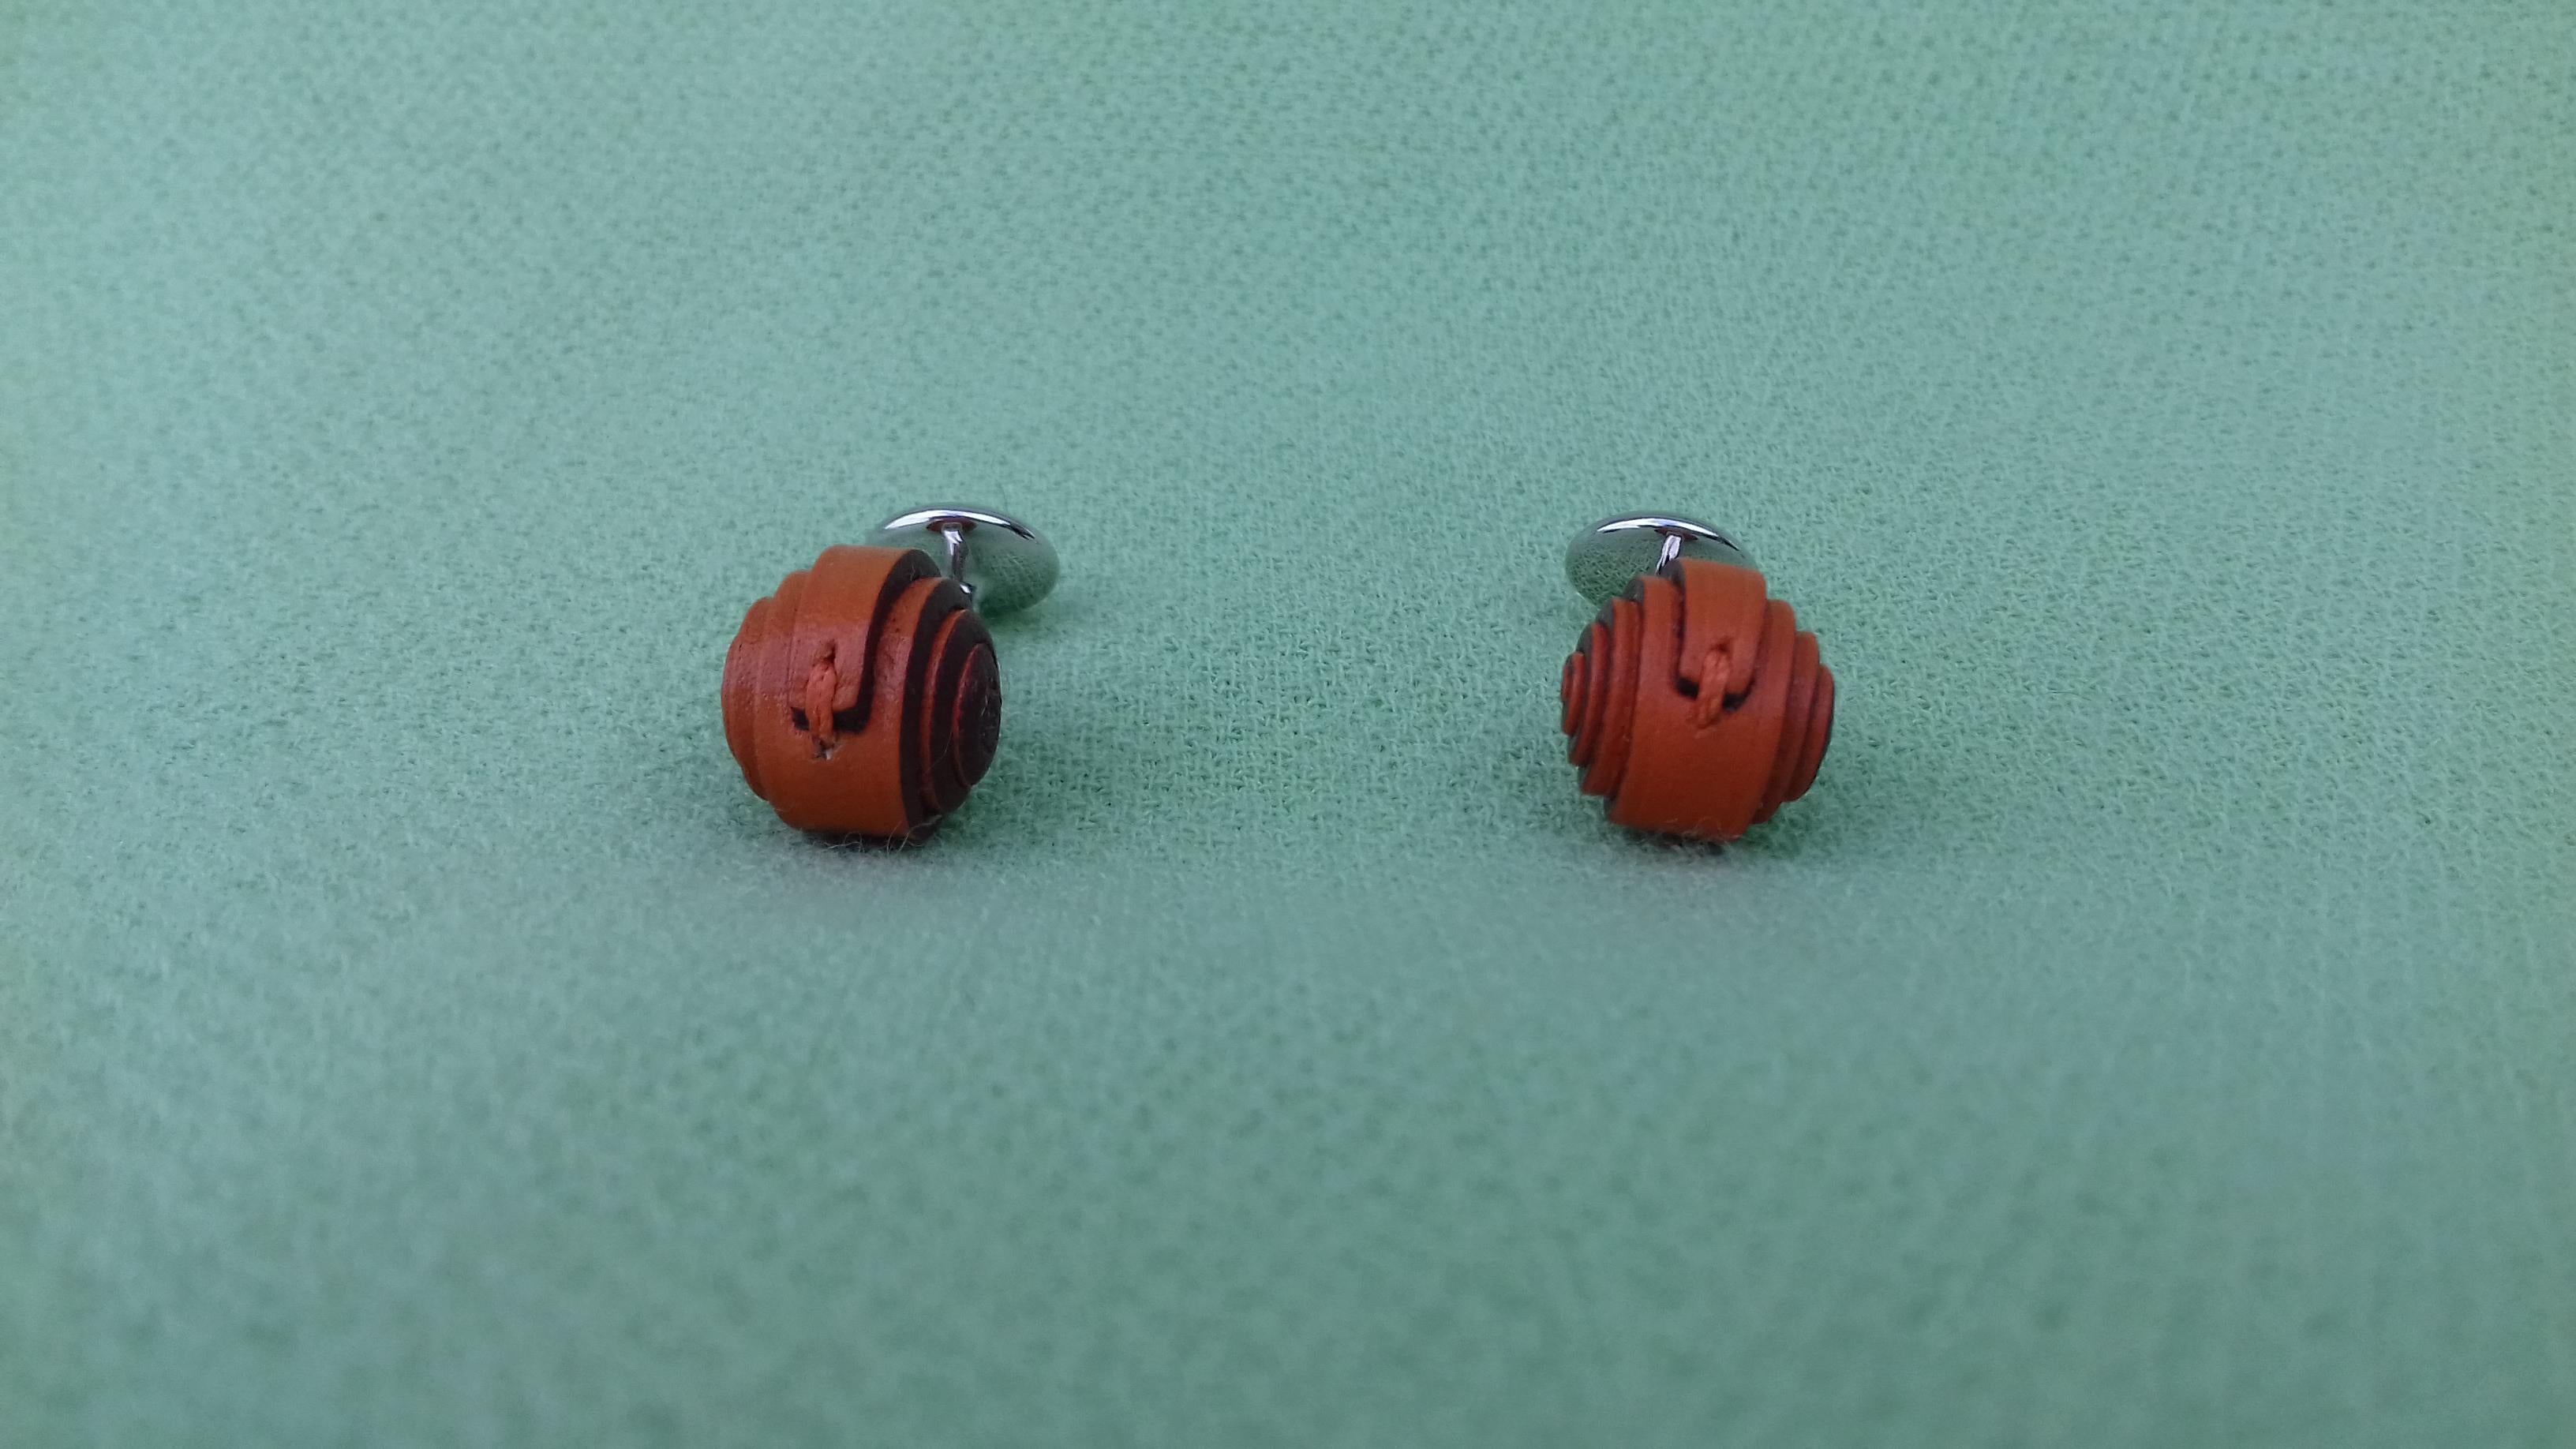 Hermès Coiled Leather and Sterling Silver Cuffs Button Snail Shaped Cufflinks  10